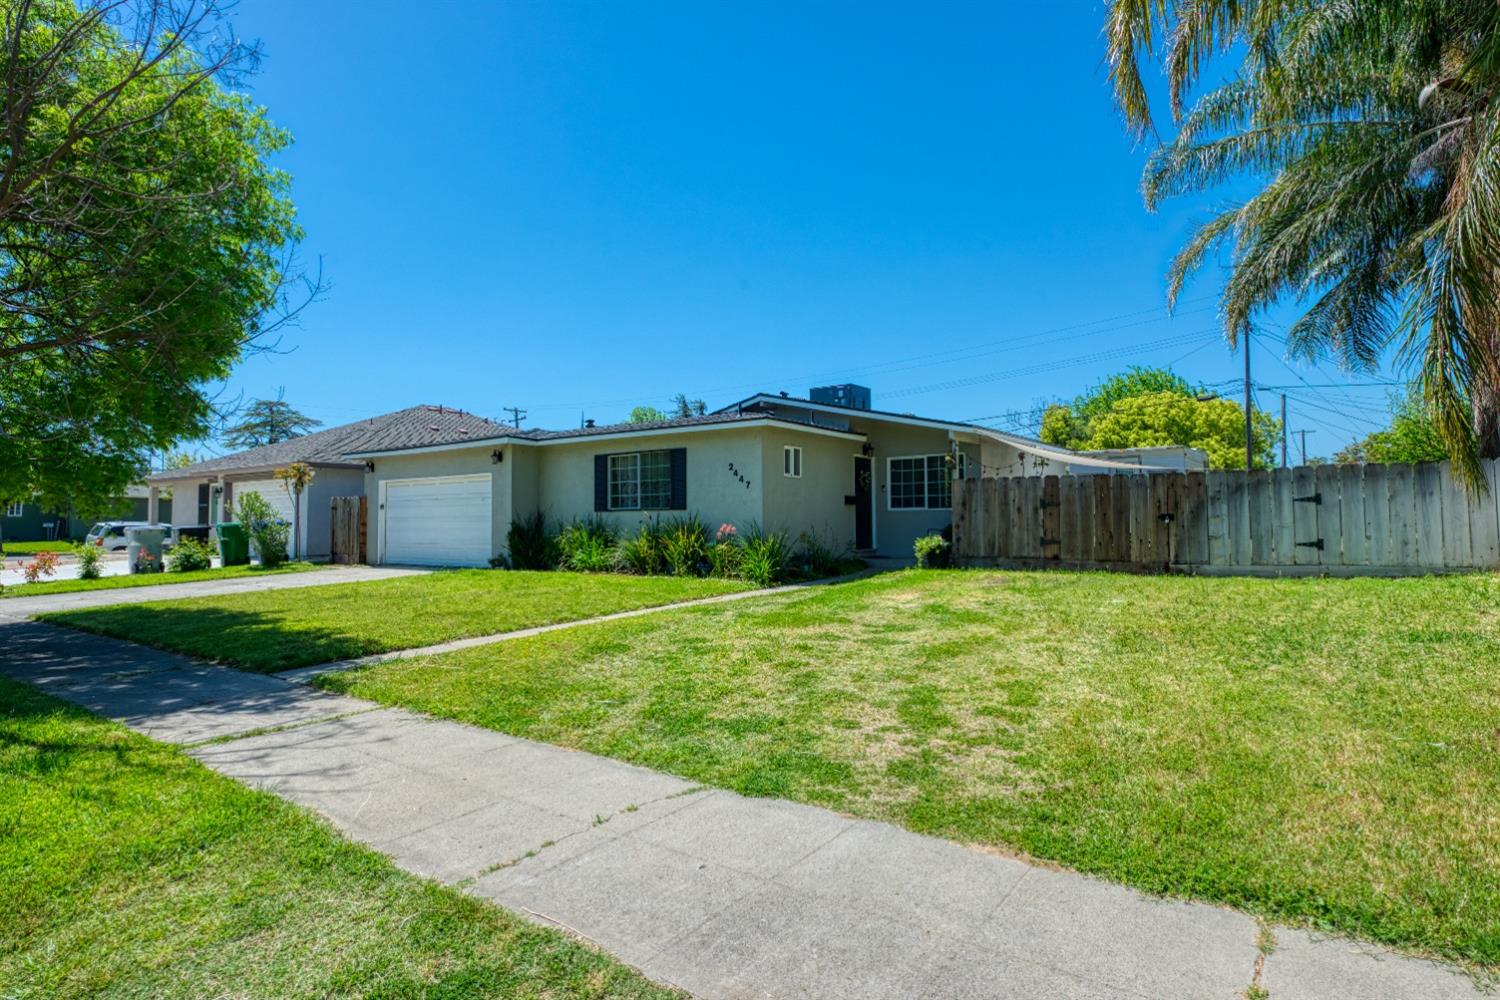 Photo of 2447 3rd St in Atwater, CA